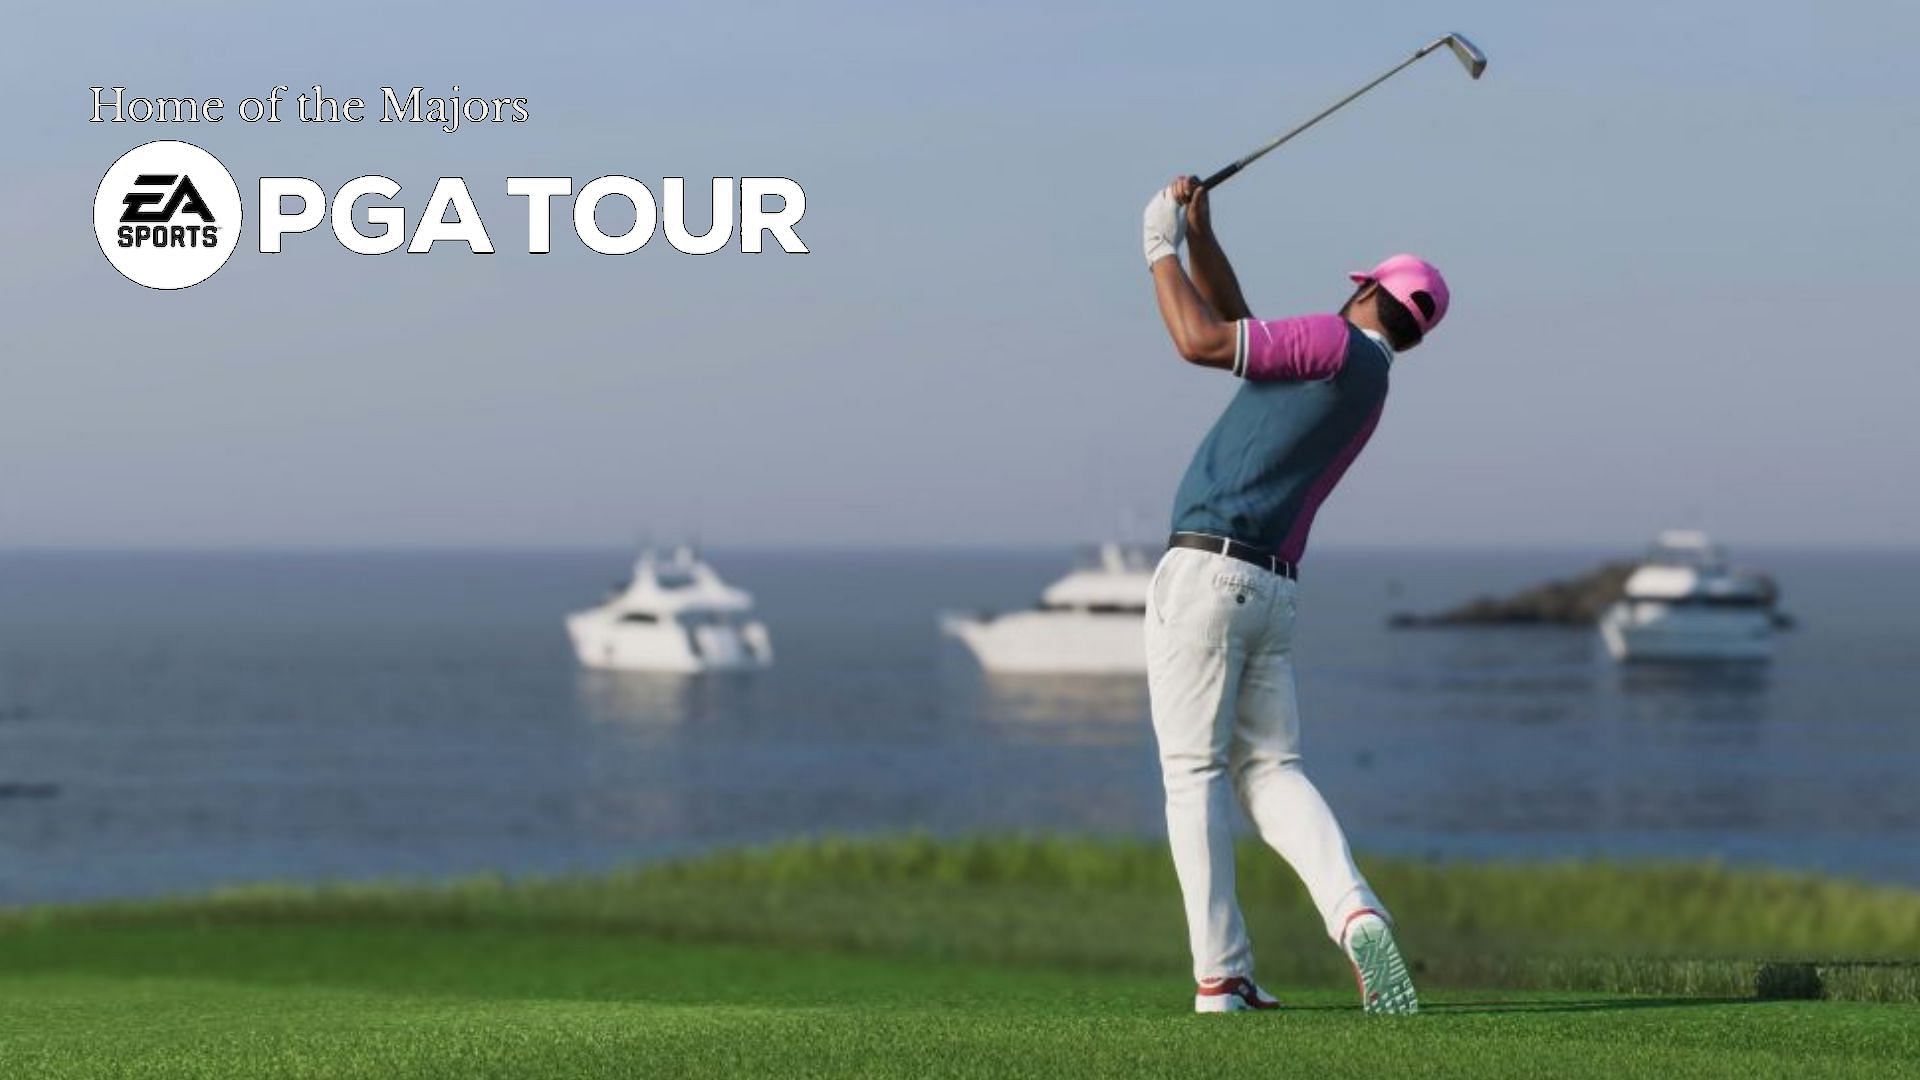 deluxe edition Is EA Sports PGA Tour 'Digital Deluxe Edition' worth it